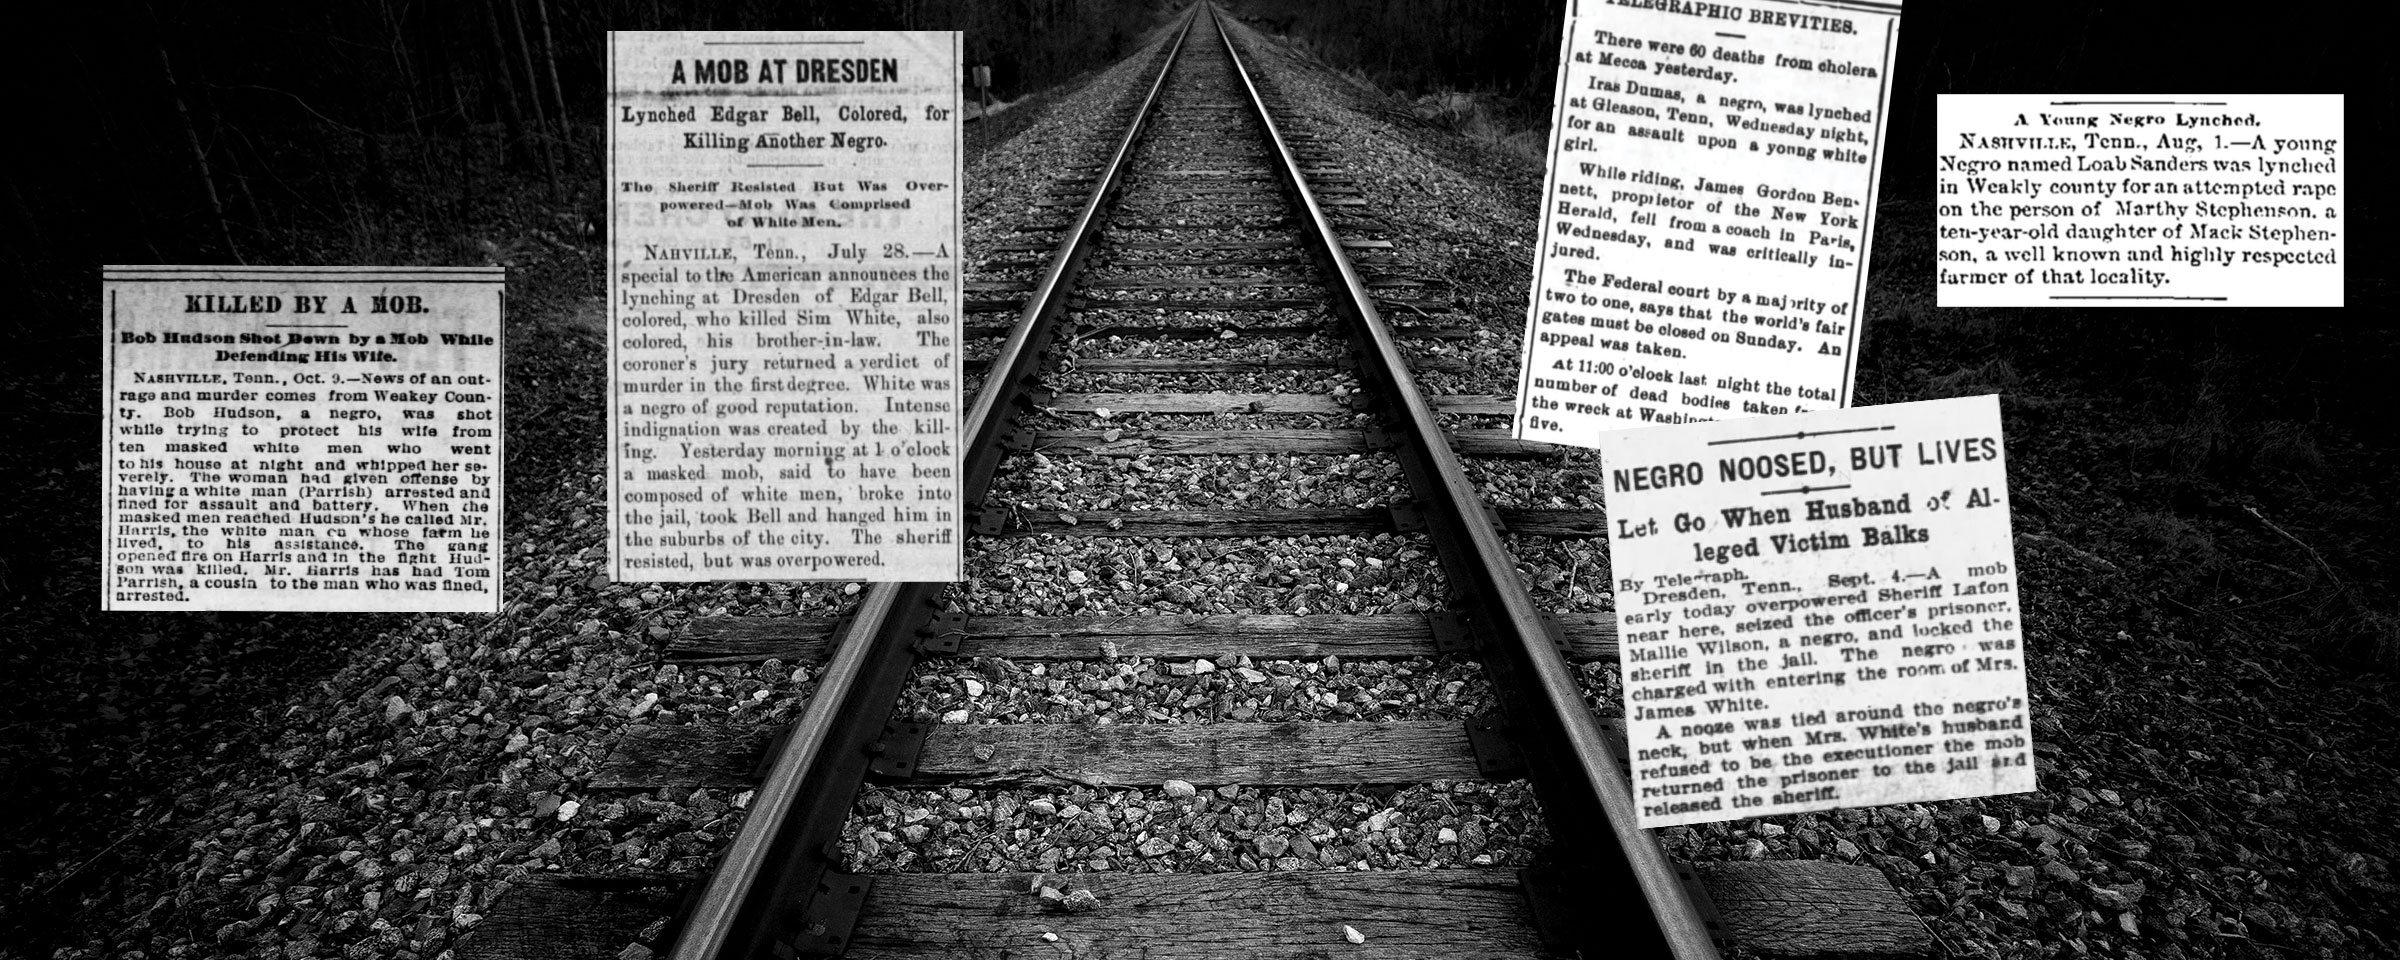 A photo illustration shows Newspaper clippings detaling lynchings over railroad tracks